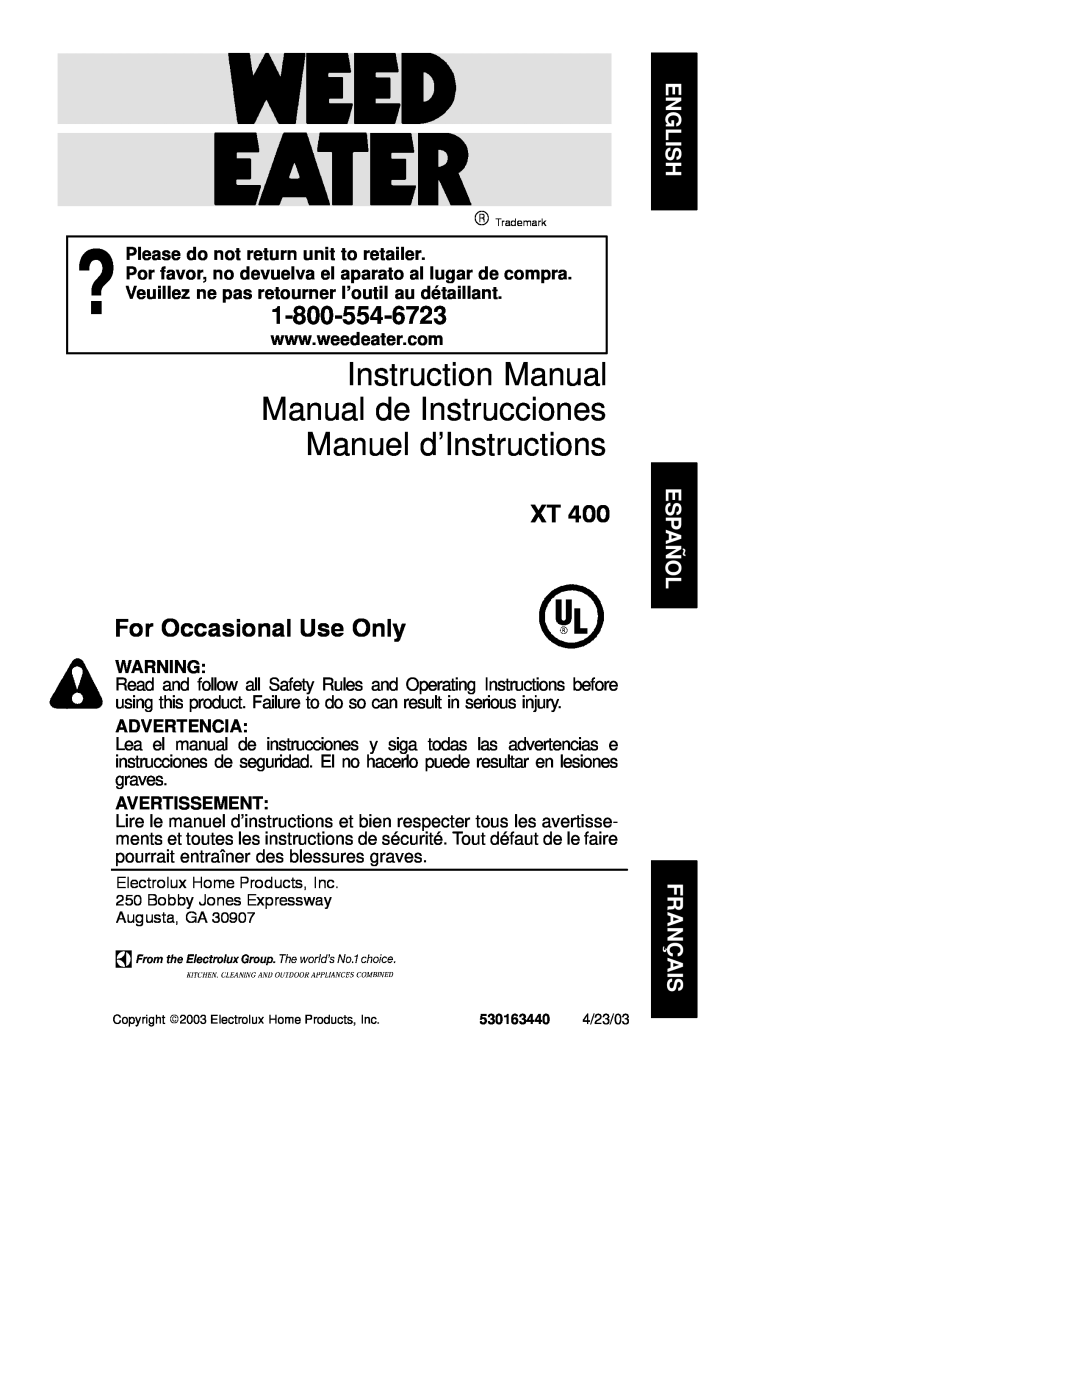 Weed Eater 530163440 instruction manual Please do not return unit to retailer, Advertencia, Avertissement 